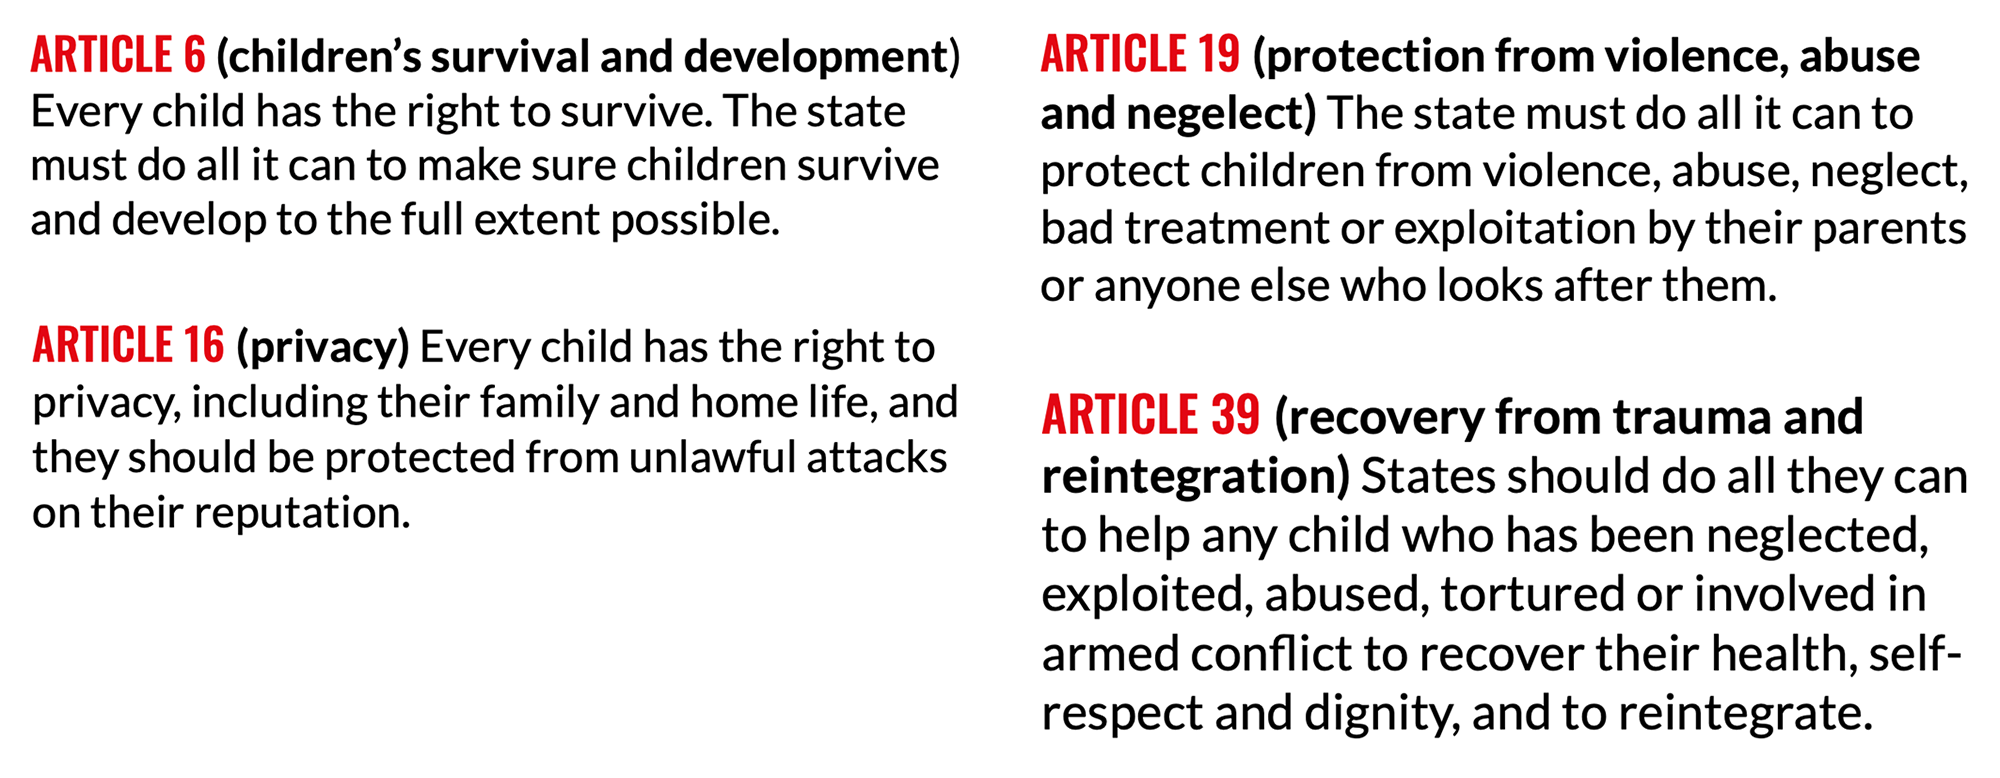 Removing child sexual exploitation and abuse materials: call to action